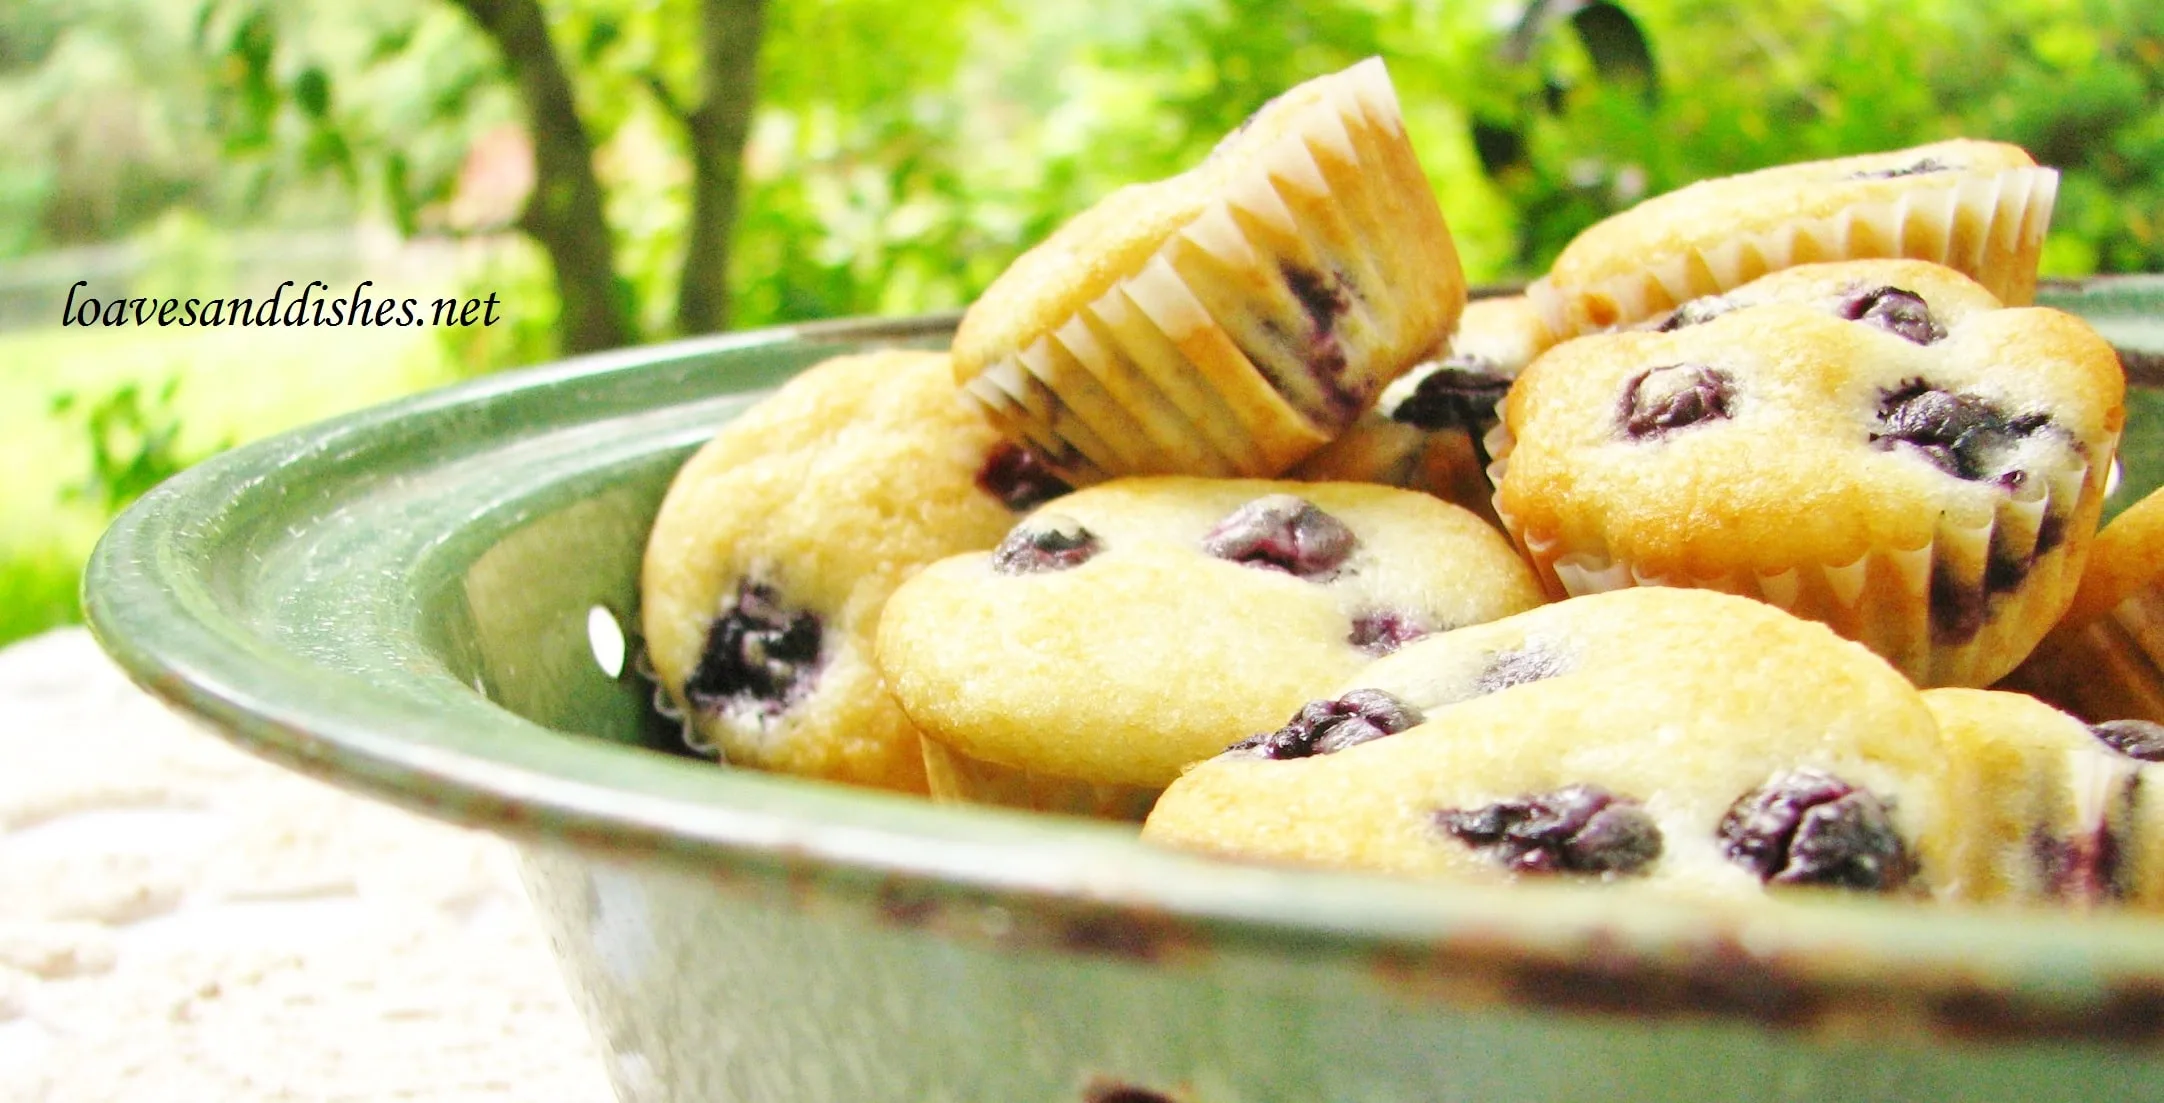 several mini blueberry muffins in a green bowl on a white table cloth